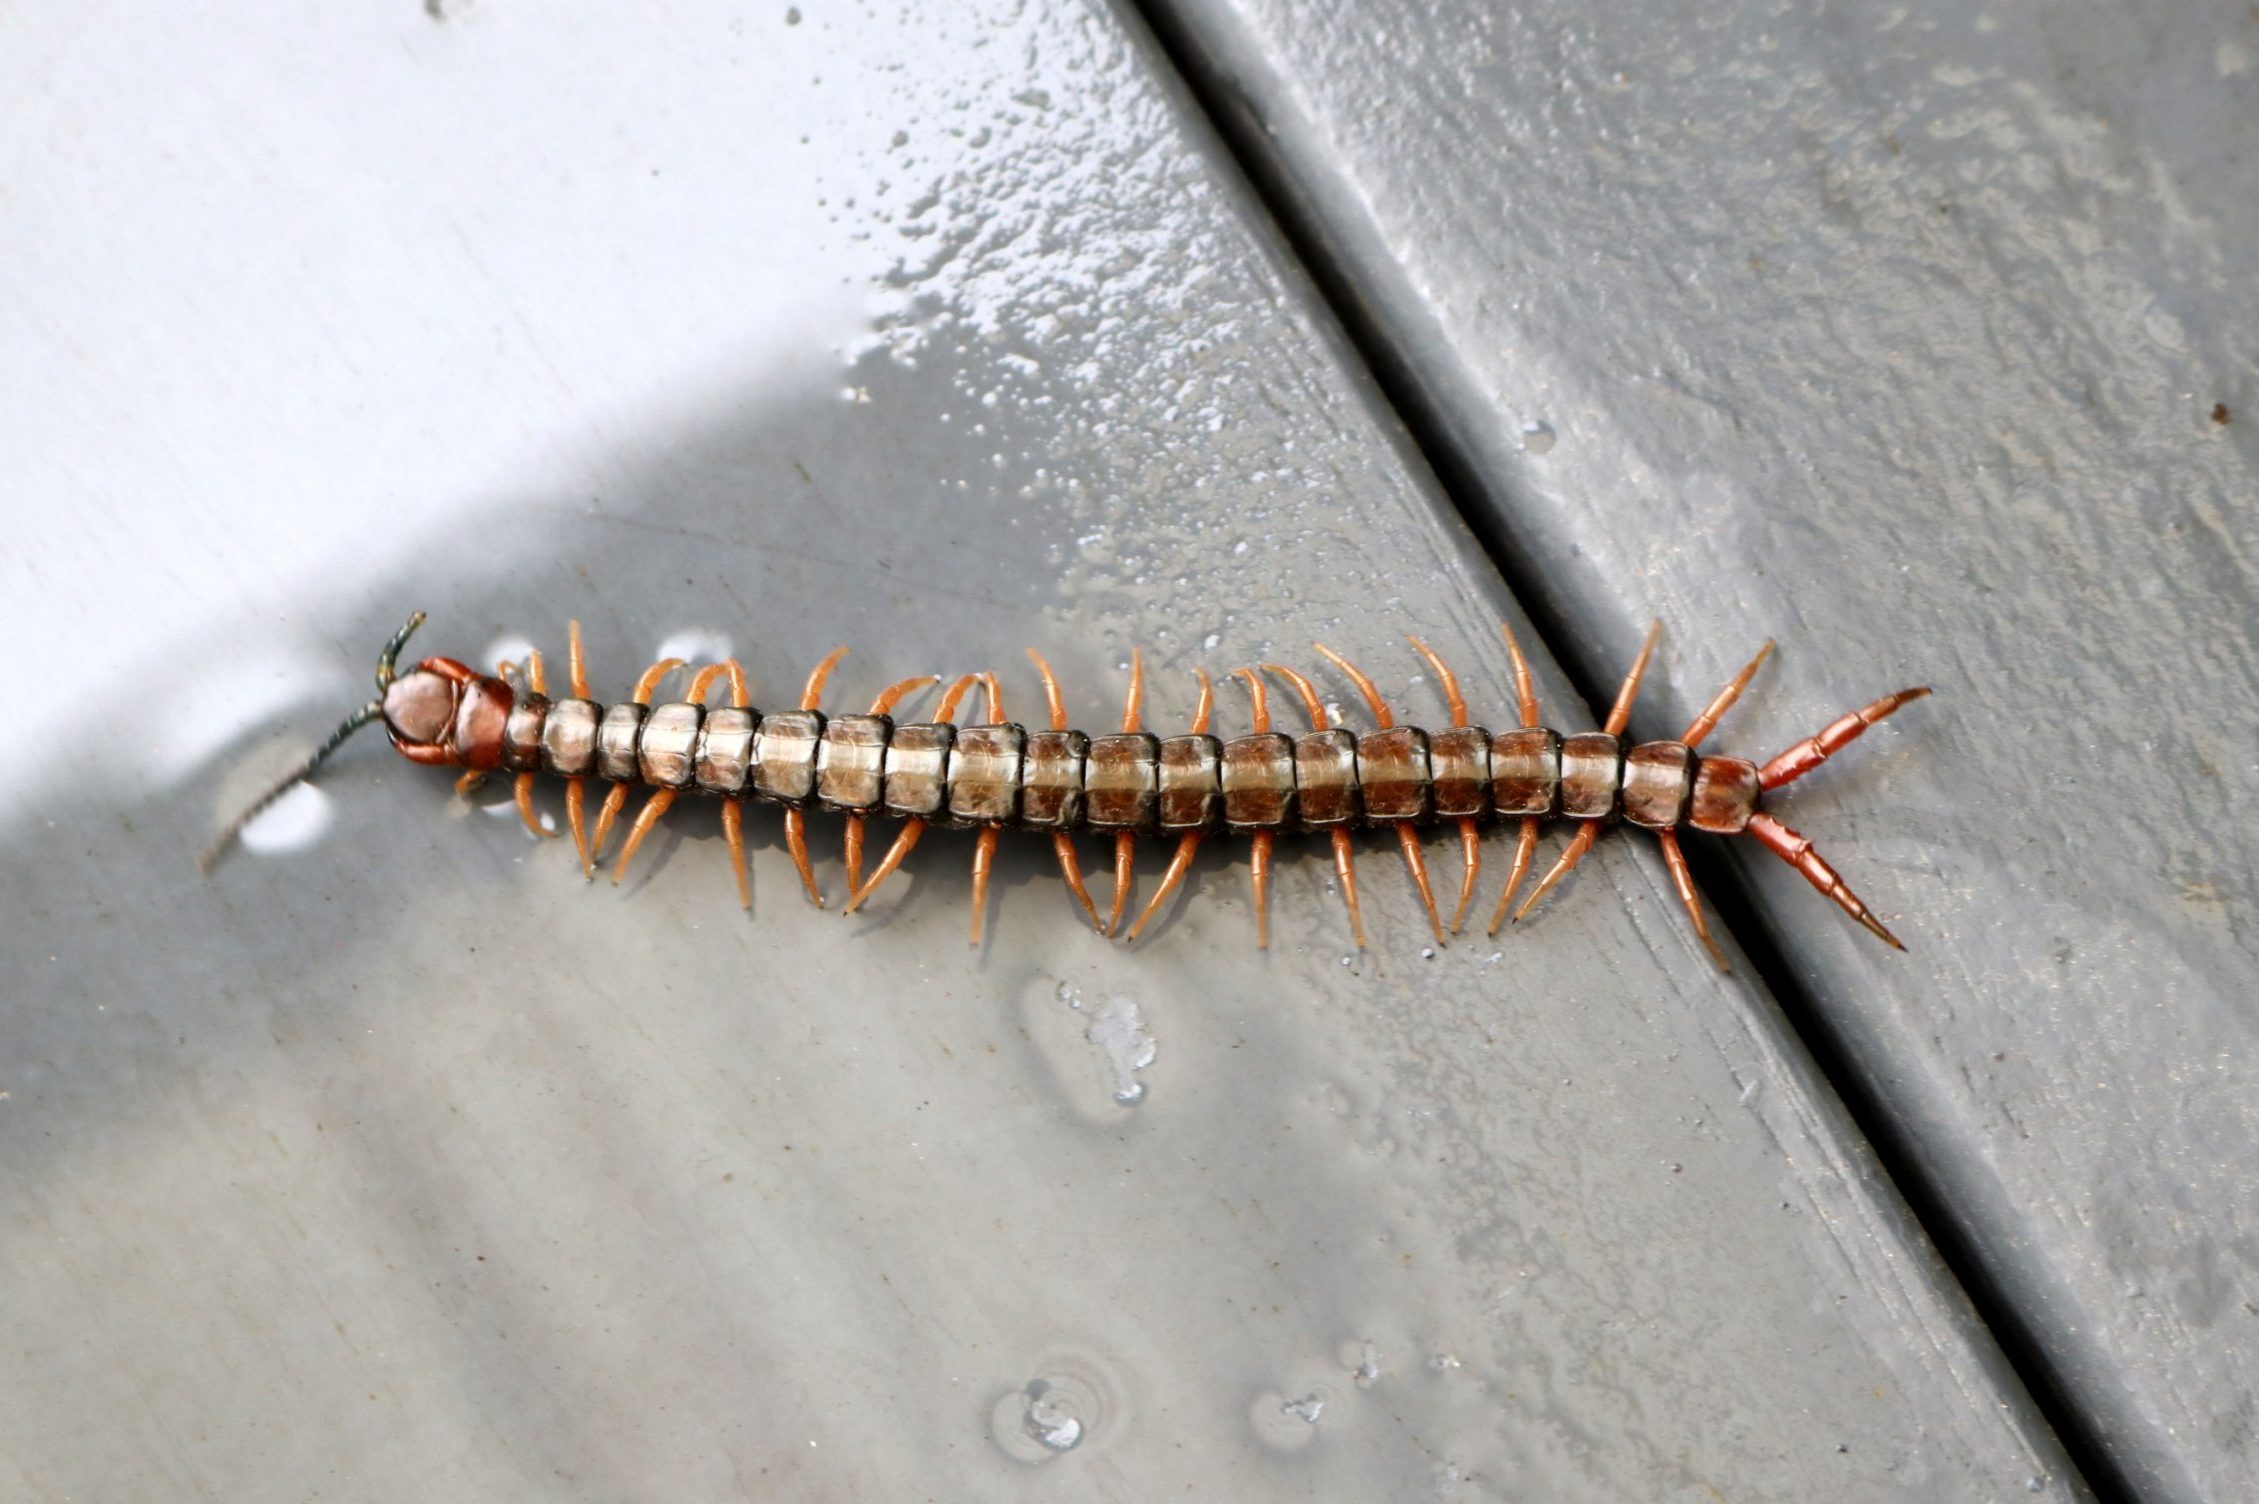 8 Most Common Types of Centipedes You'll Find in Your House